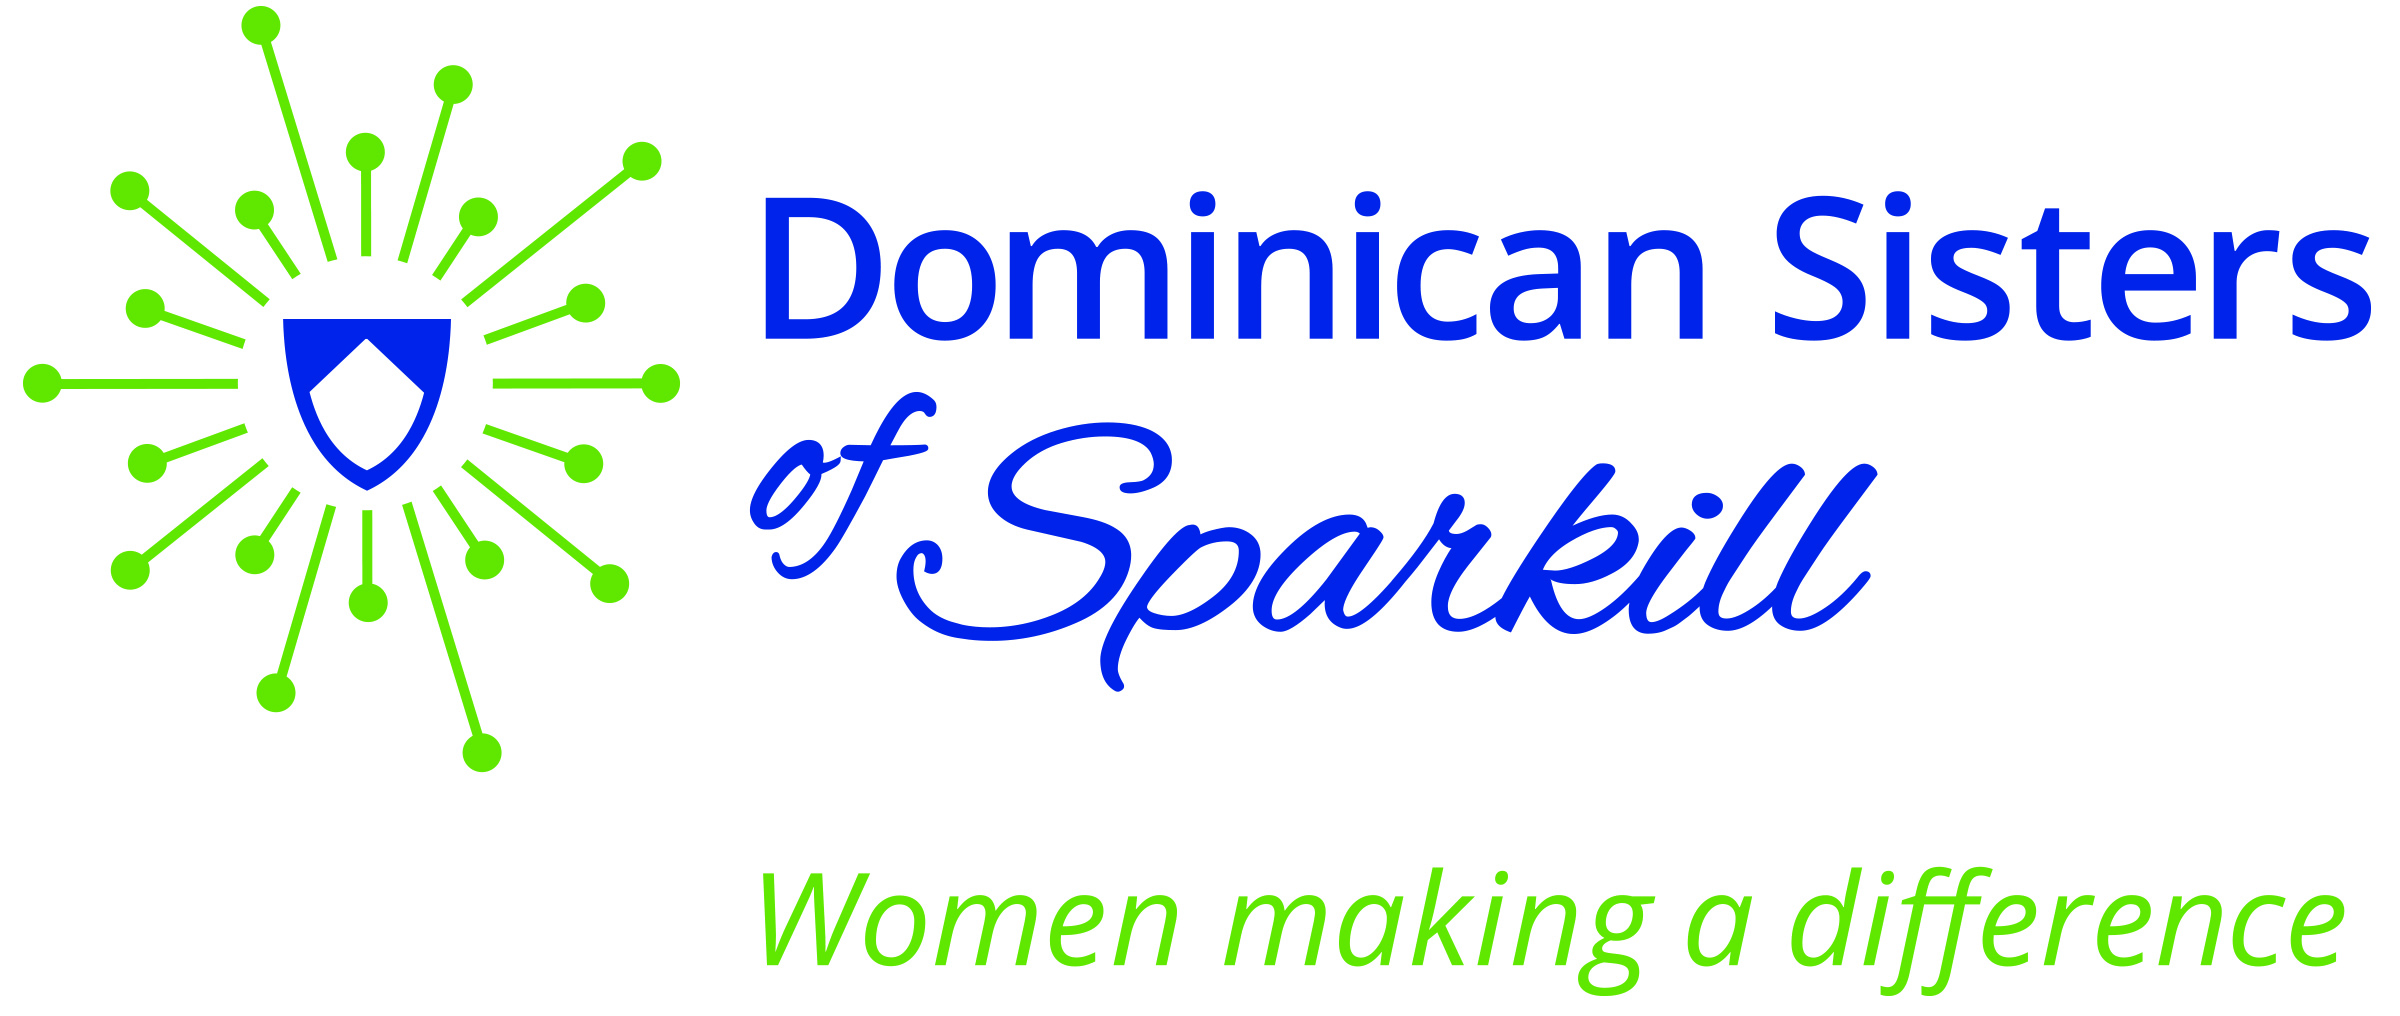 Dominican Sisters of Sparkill - United States